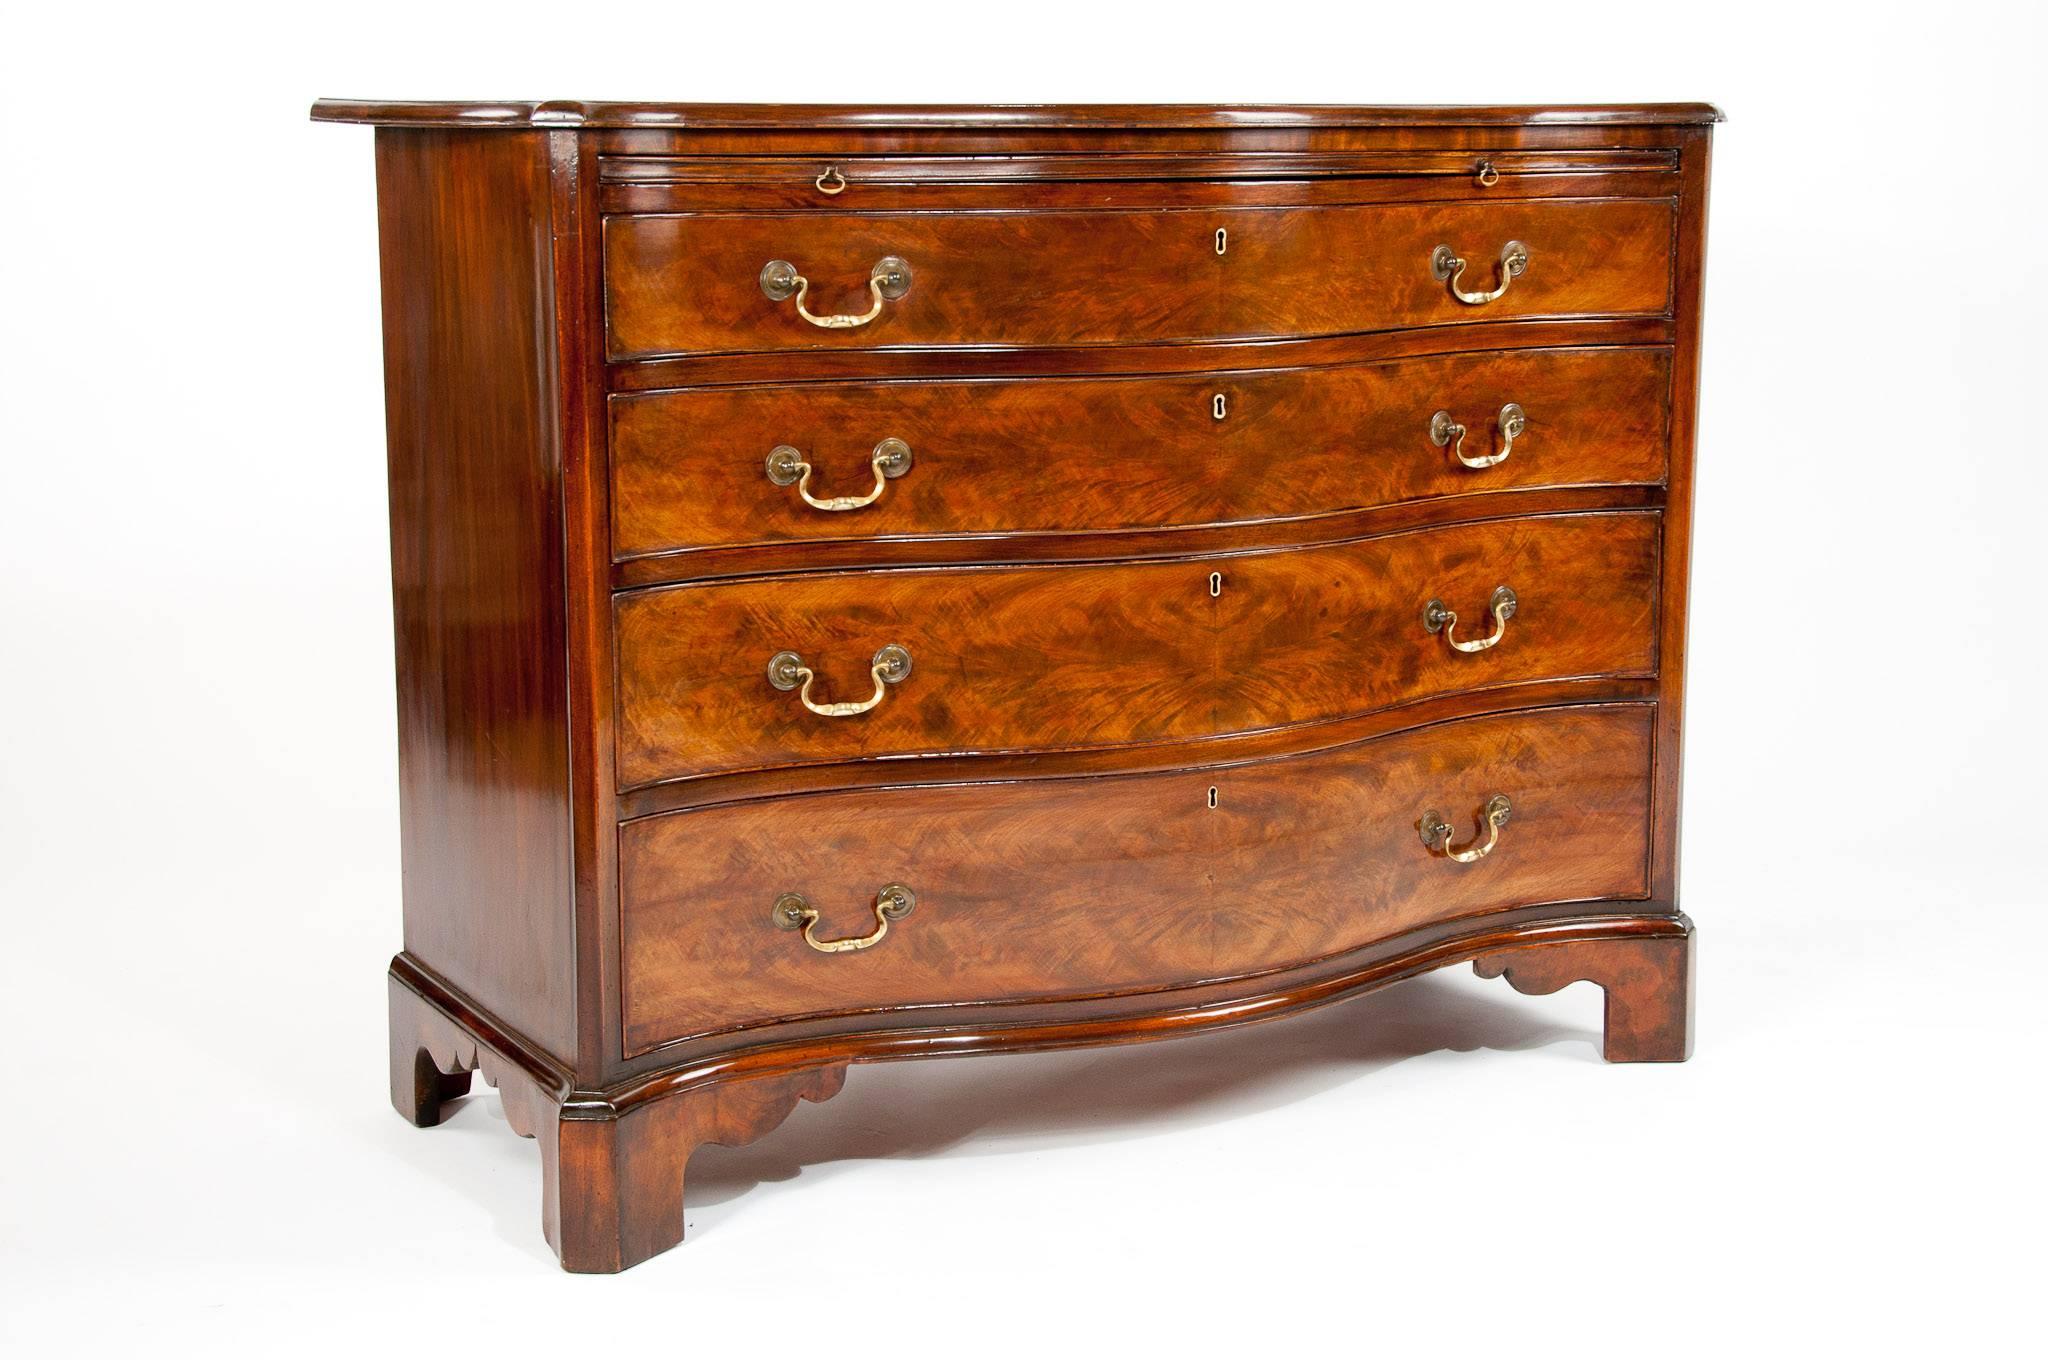 A wonderful flame mahogany serpentine chest of drawers with brushing slide standing on bracket feet.
This fine quality 19th century chest of drawers has been constructed with beautiful slender serpentine and the finest flame mahogany veneers which